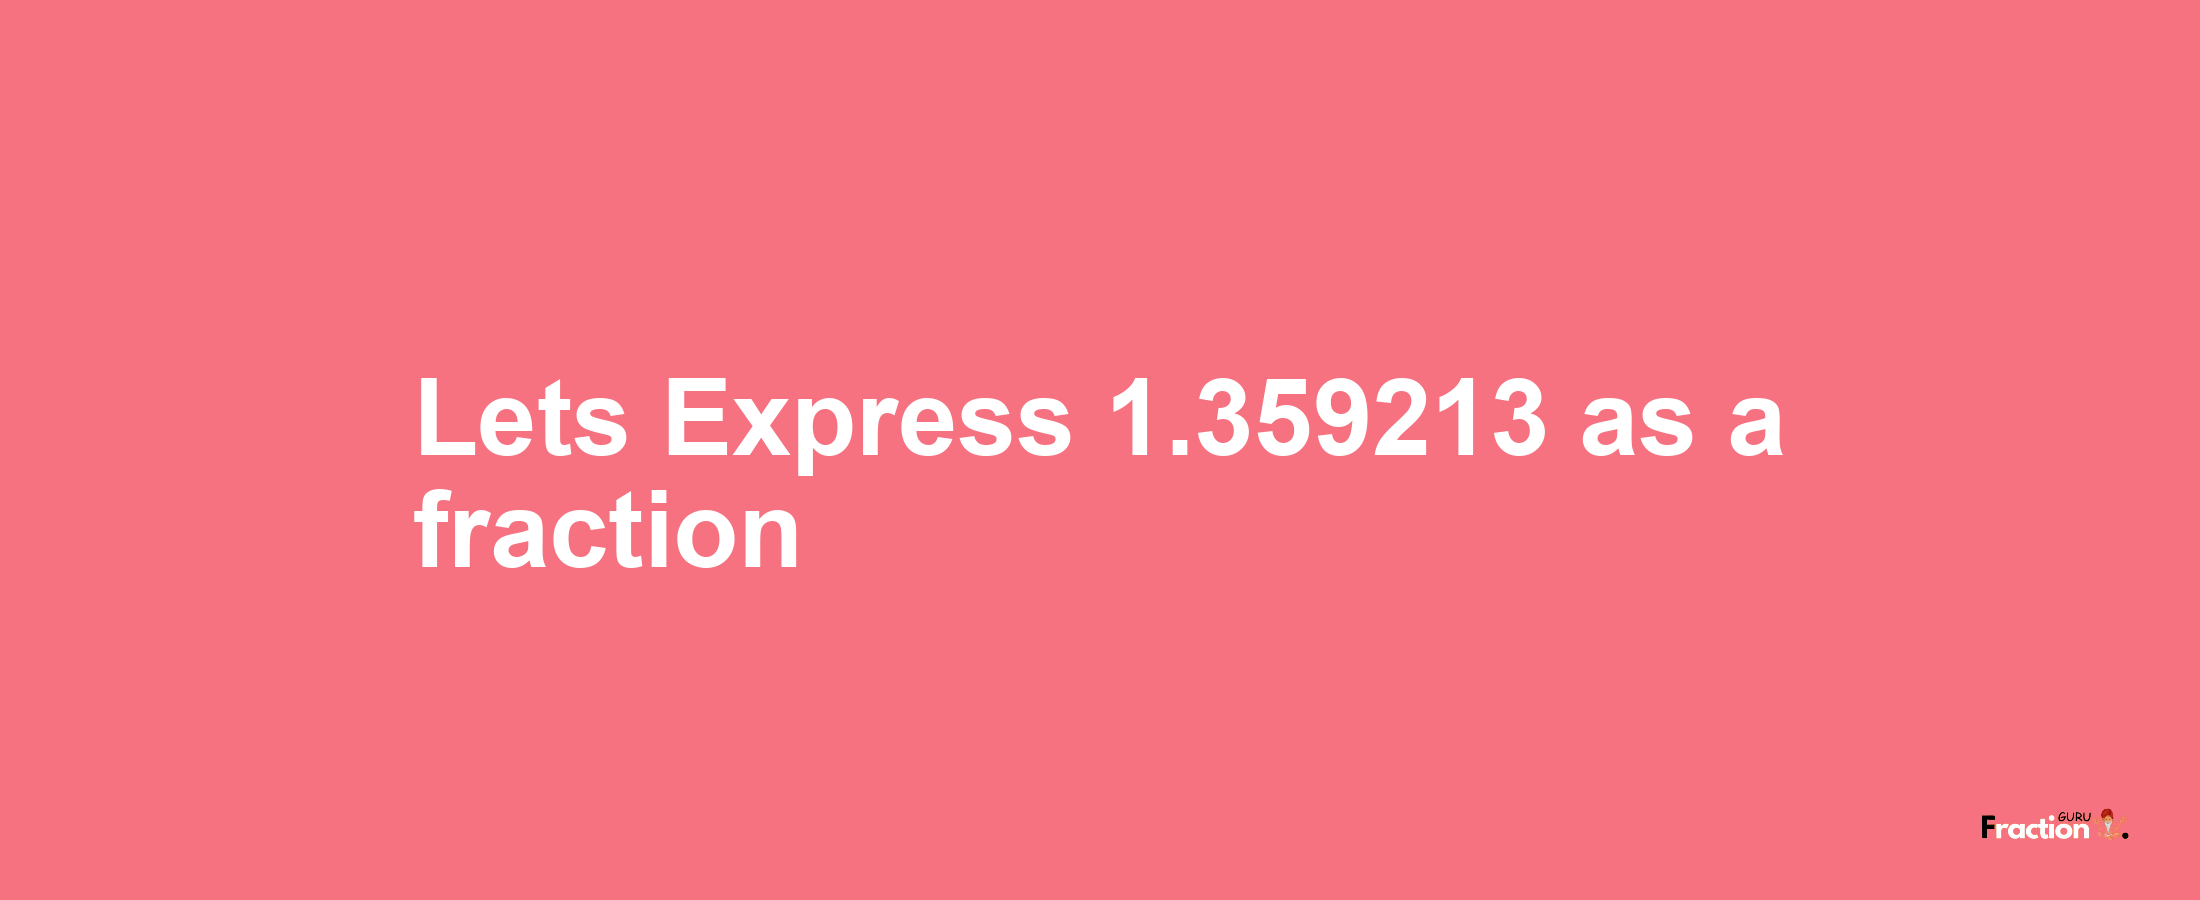 Lets Express 1.359213 as afraction